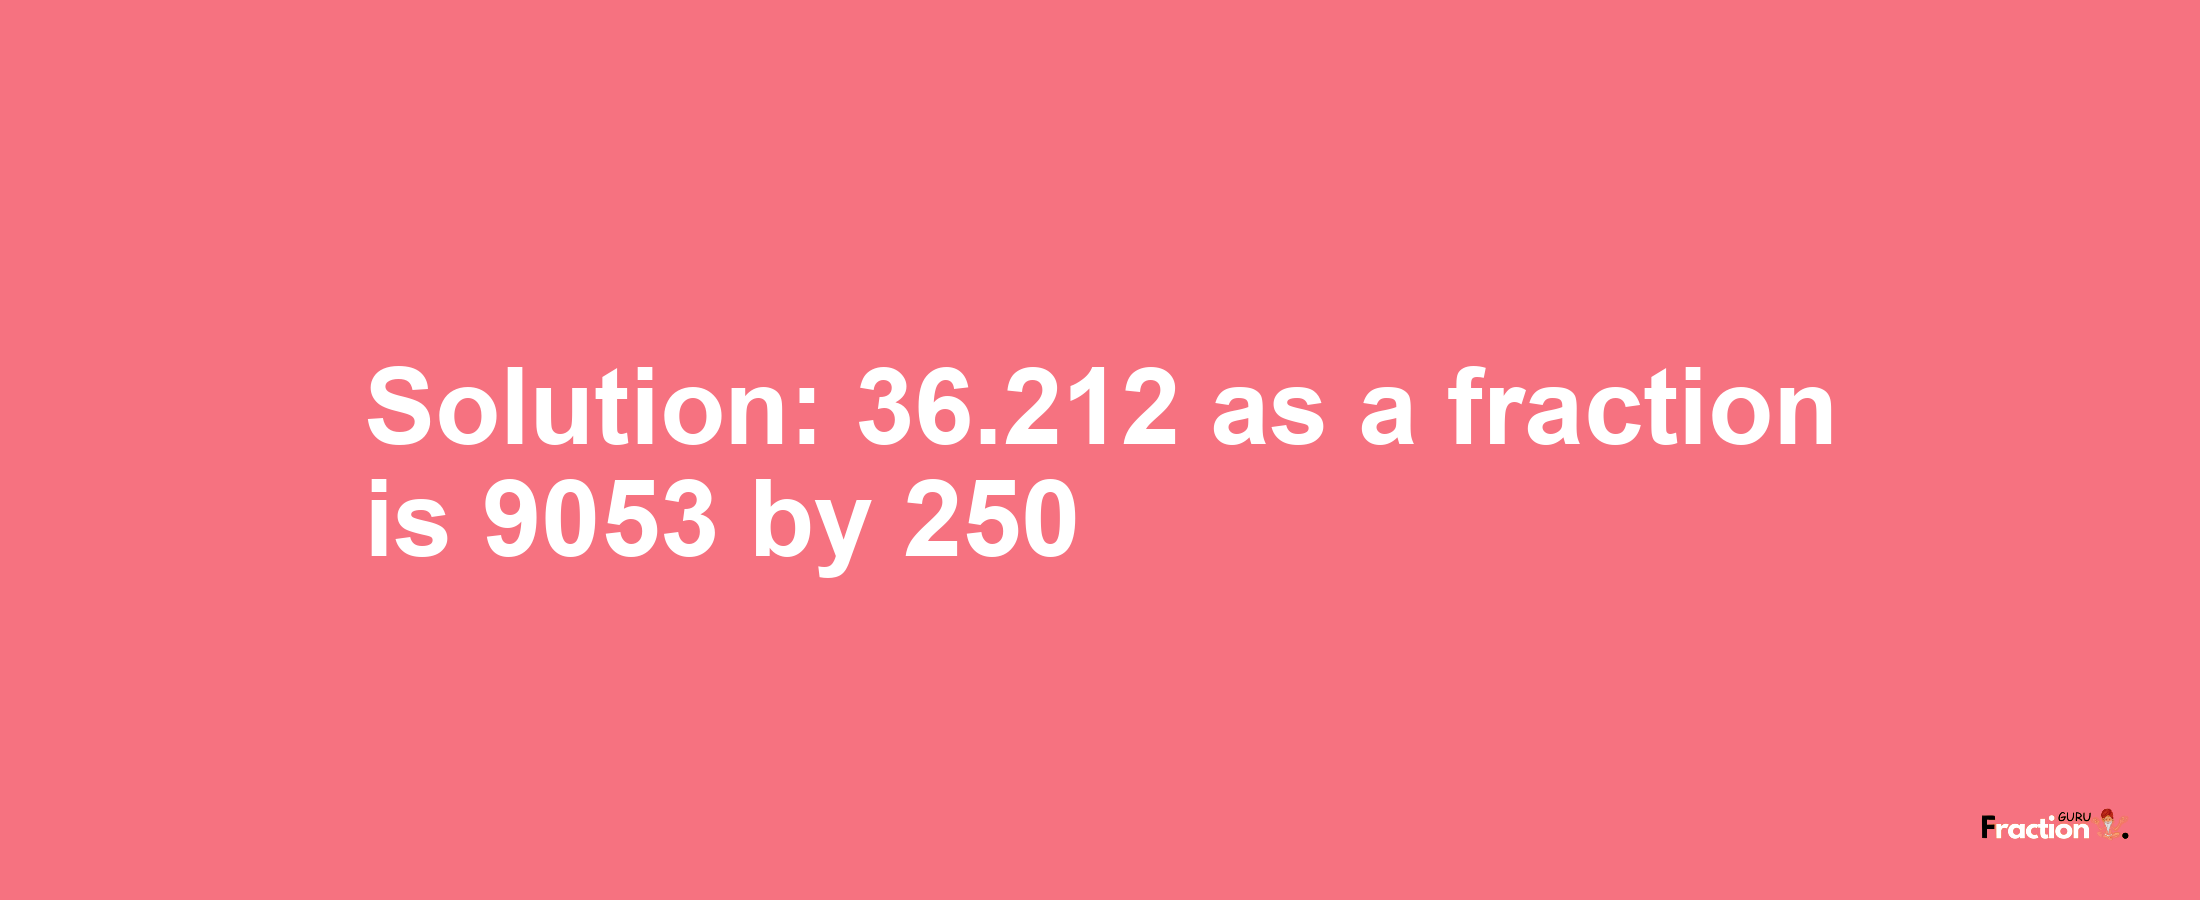 Solution:36.212 as a fraction is 9053/250